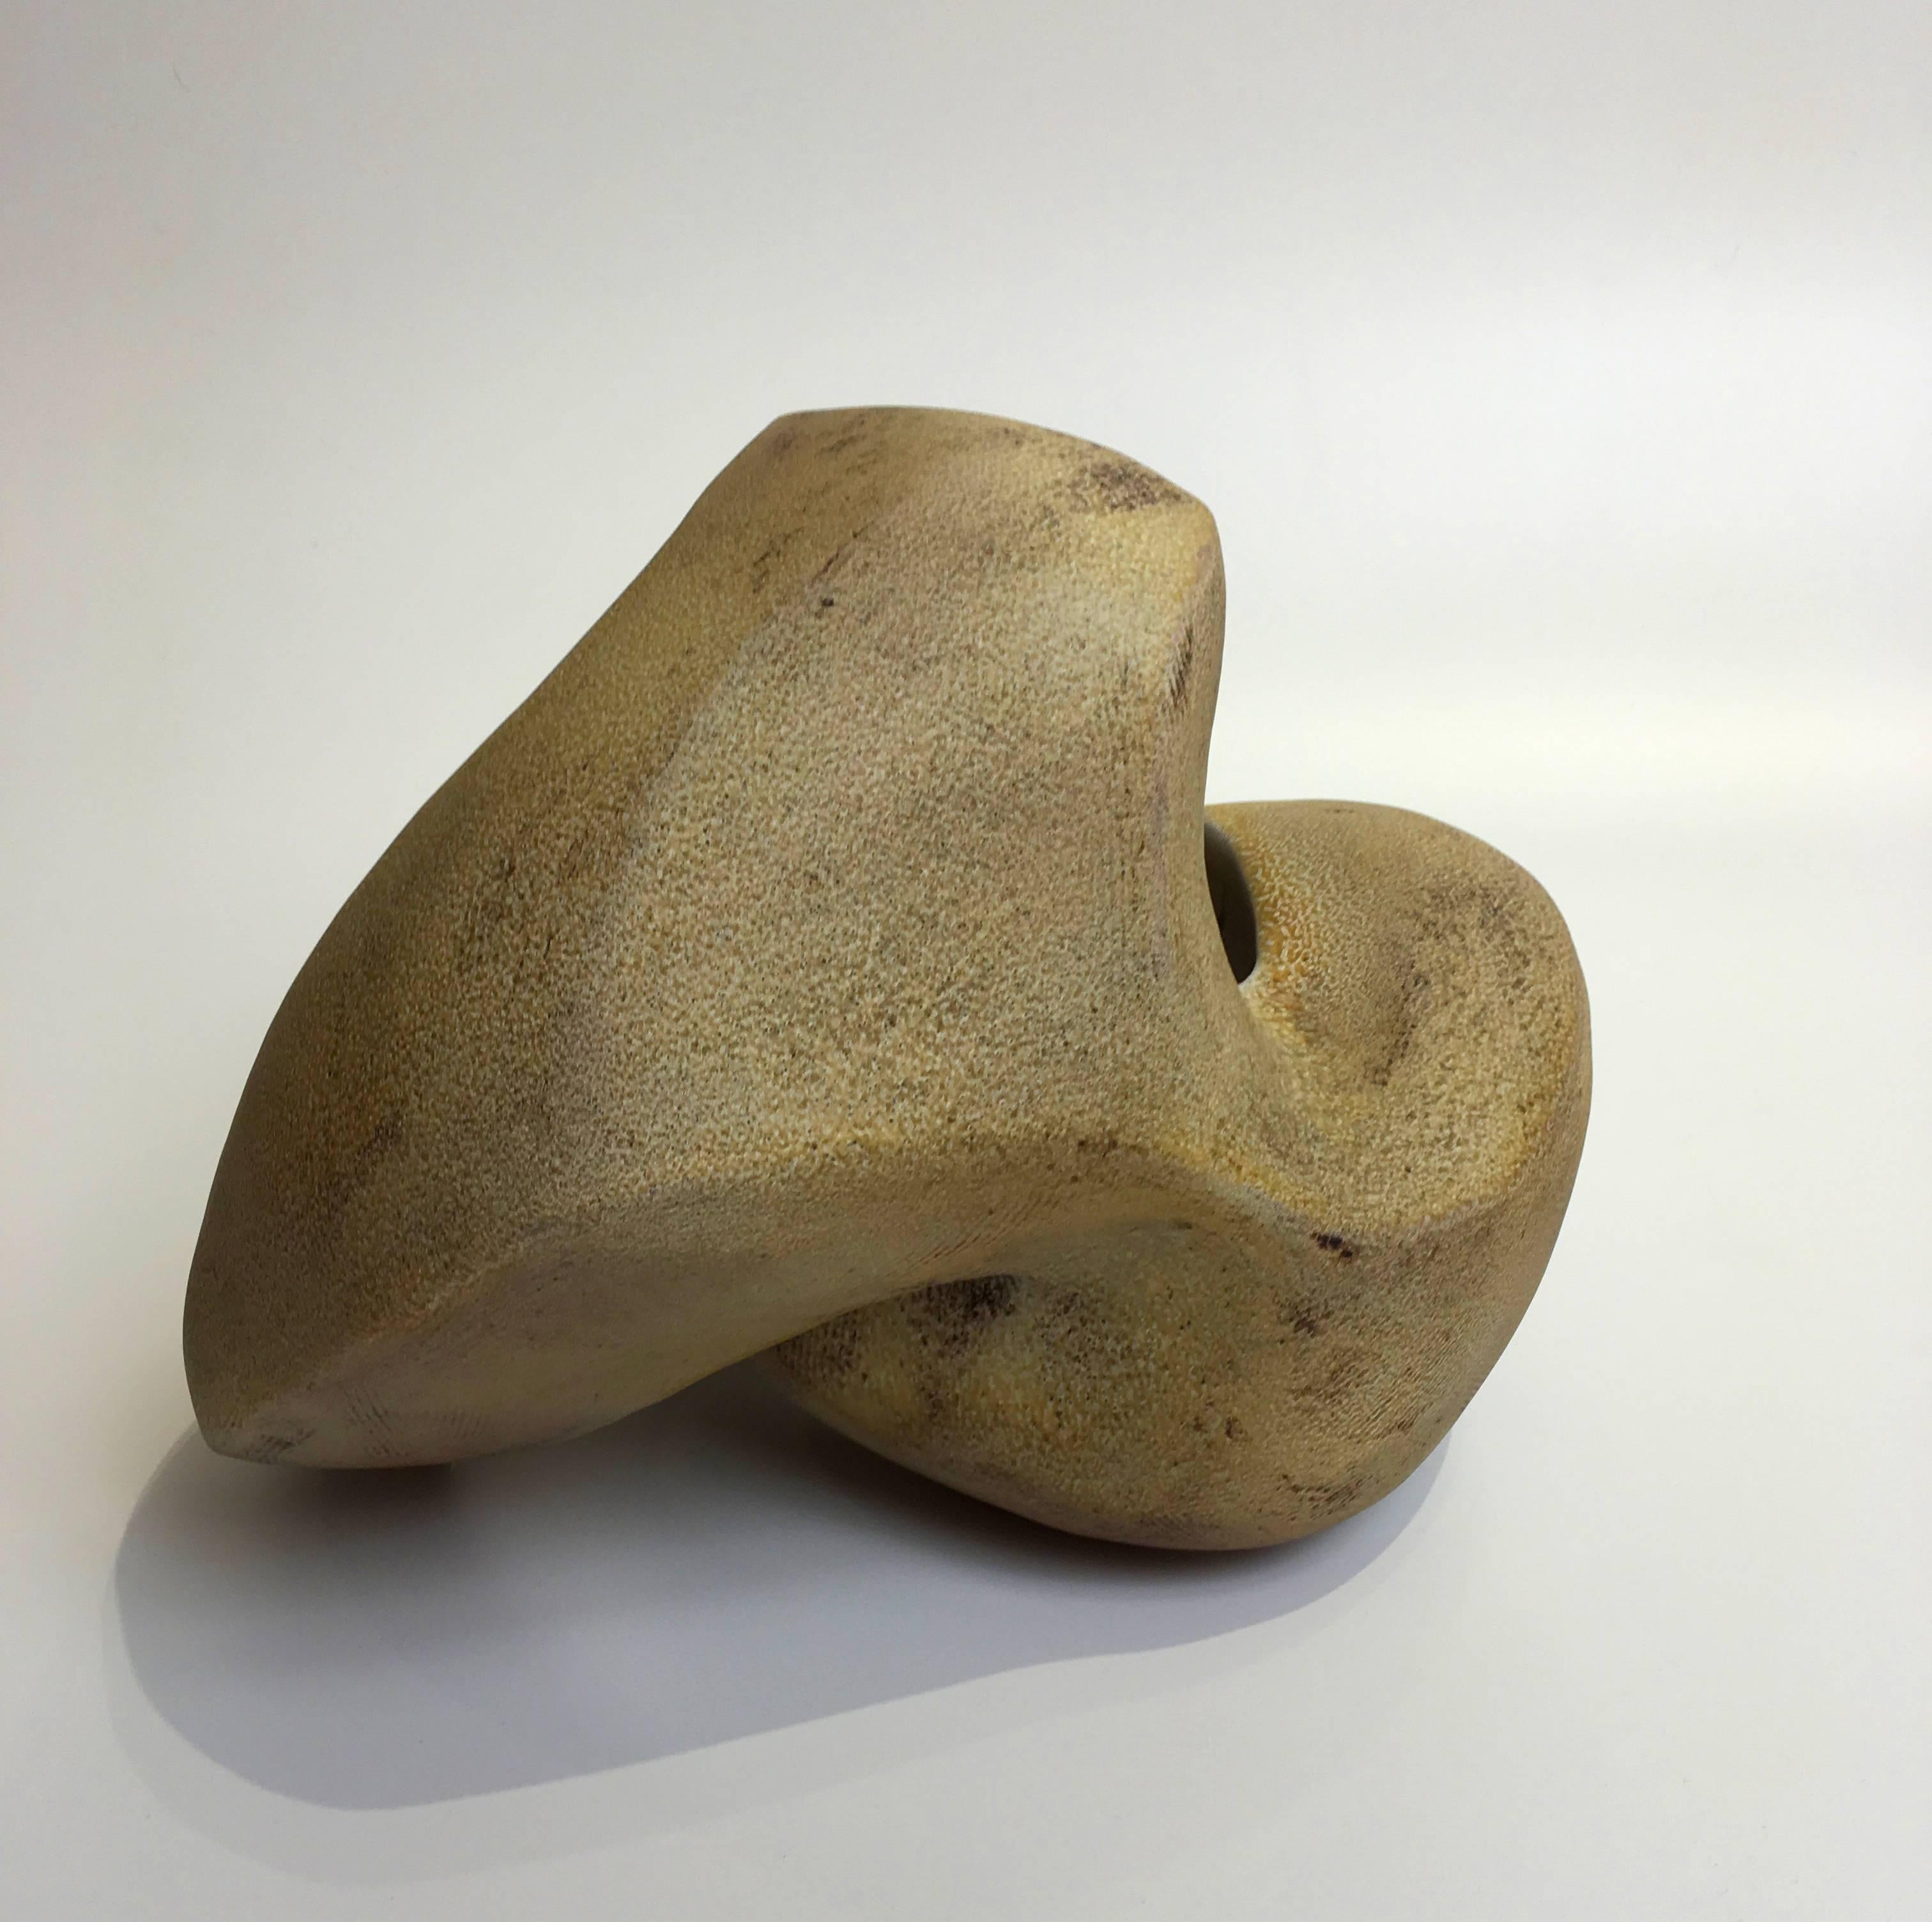 Amber Recoil, Abstract Geometric Ceramic Sculpture - Beige Abstract Sculpture by Jerilyn Virden